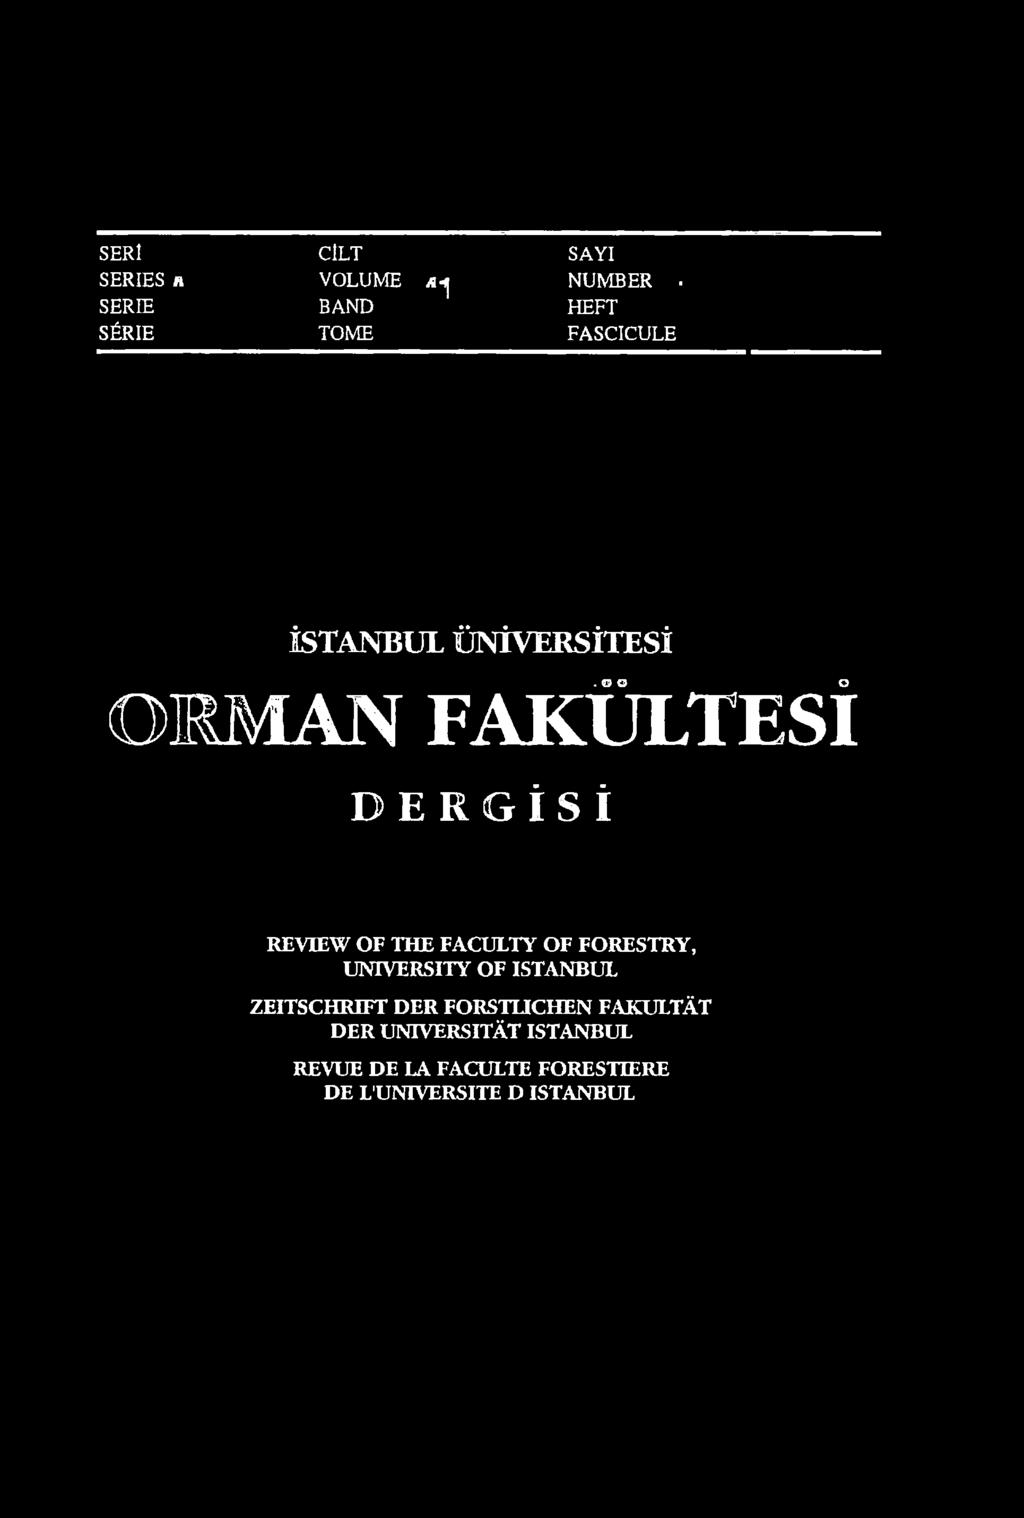 O F FORESTRY, UNIVERSITY OF İSTANBUL ZEITSCHRBFT D ER F O R ST U C H E N